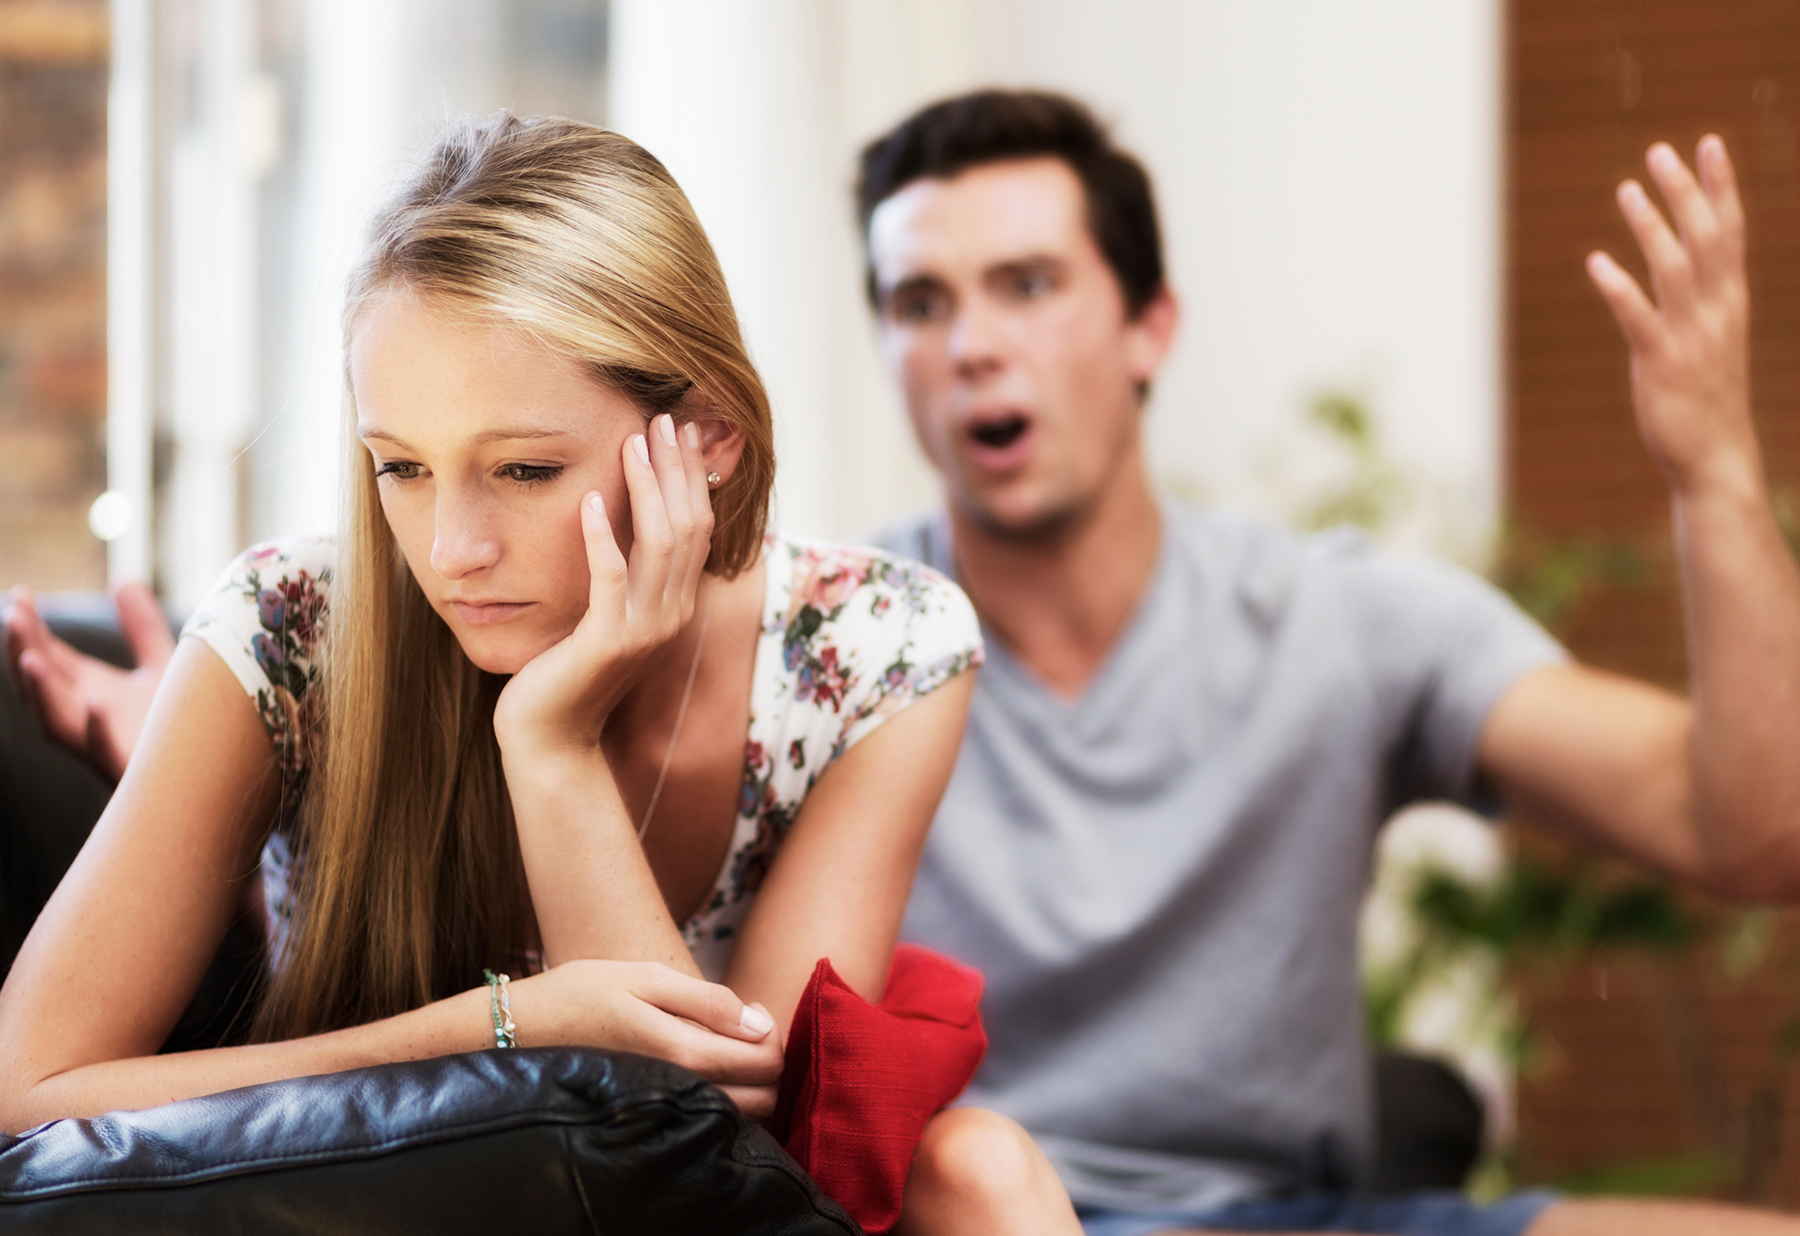 couples talking about problems all the time kills extramarital affairs early on